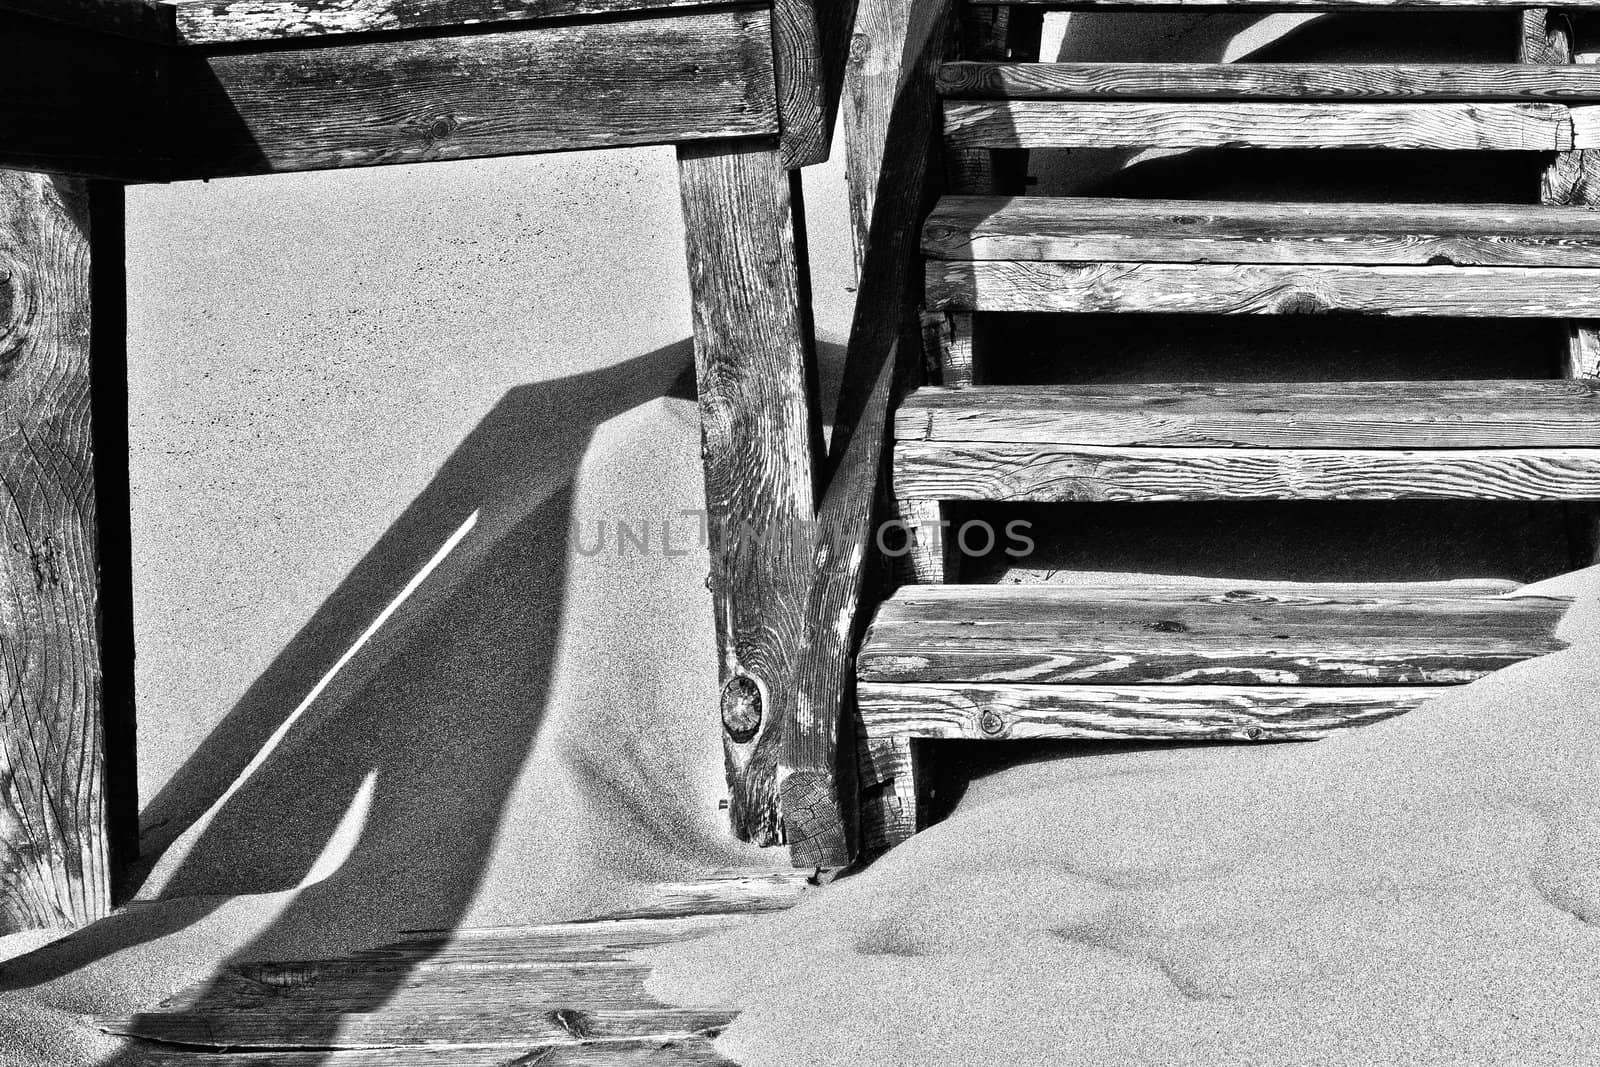 Abstract image showing detail of wooden beach stairs